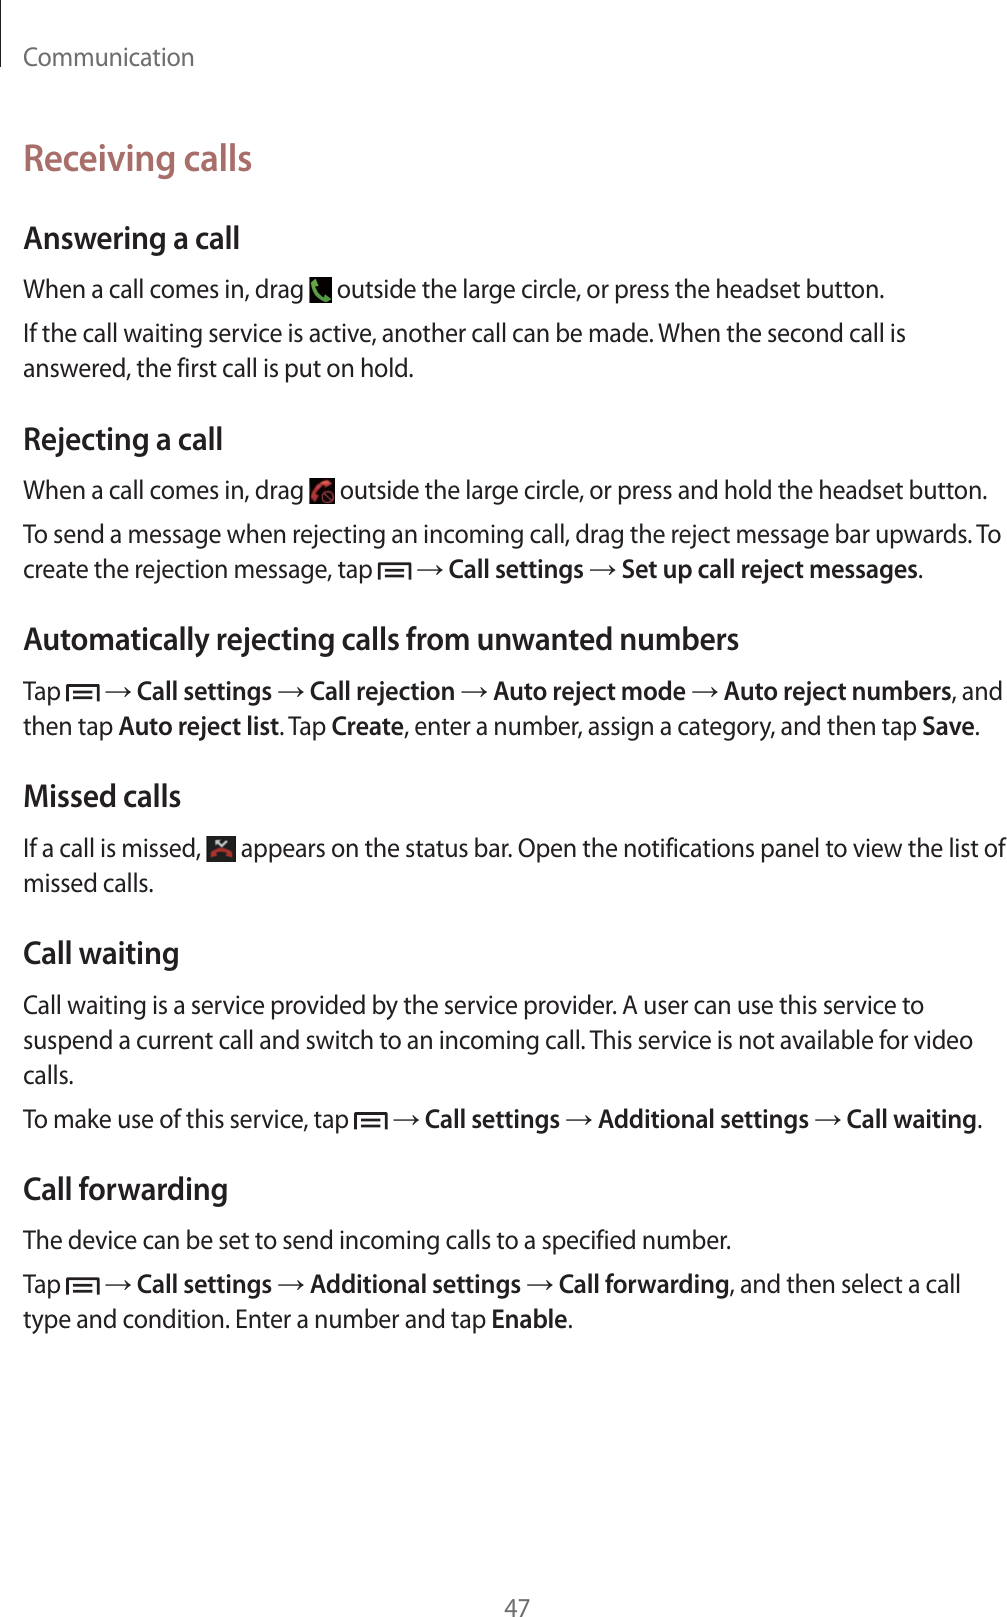 Communication47Receiving callsAnswering a callWhen a call comes in, drag   outside the large circle, or press the headset button.If the call waiting service is active, another call can be made. When the second call is answered, the first call is put on hold.Rejecting a callWhen a call comes in, drag   outside the large circle, or press and hold the headset button.To send a message when rejecting an incoming call, drag the reject message bar upwards. To create the rejection message, tap    Call settings  Set up call reject messages.Automatically rejecting calls from unwanted numbersTap    Call settings  Call rejection  Auto reject mode  Auto reject numbers, and then tap Auto reject list. Tap Create, enter a number, assign a category, and then tap Save.Missed callsIf a call is missed,   appears on the status bar. Open the notifications panel to view the list of missed calls.Call waitingCall waiting is a service provided by the service provider. A user can use this service to suspend a current call and switch to an incoming call. This service is not available for video calls.To make use of this service, tap    Call settings  Additional settings  Call waiting.Call forwardingThe device can be set to send incoming calls to a specified number.Tap    Call settings  Additional settings  Call forwarding, and then select a call type and condition. Enter a number and tap Enable.